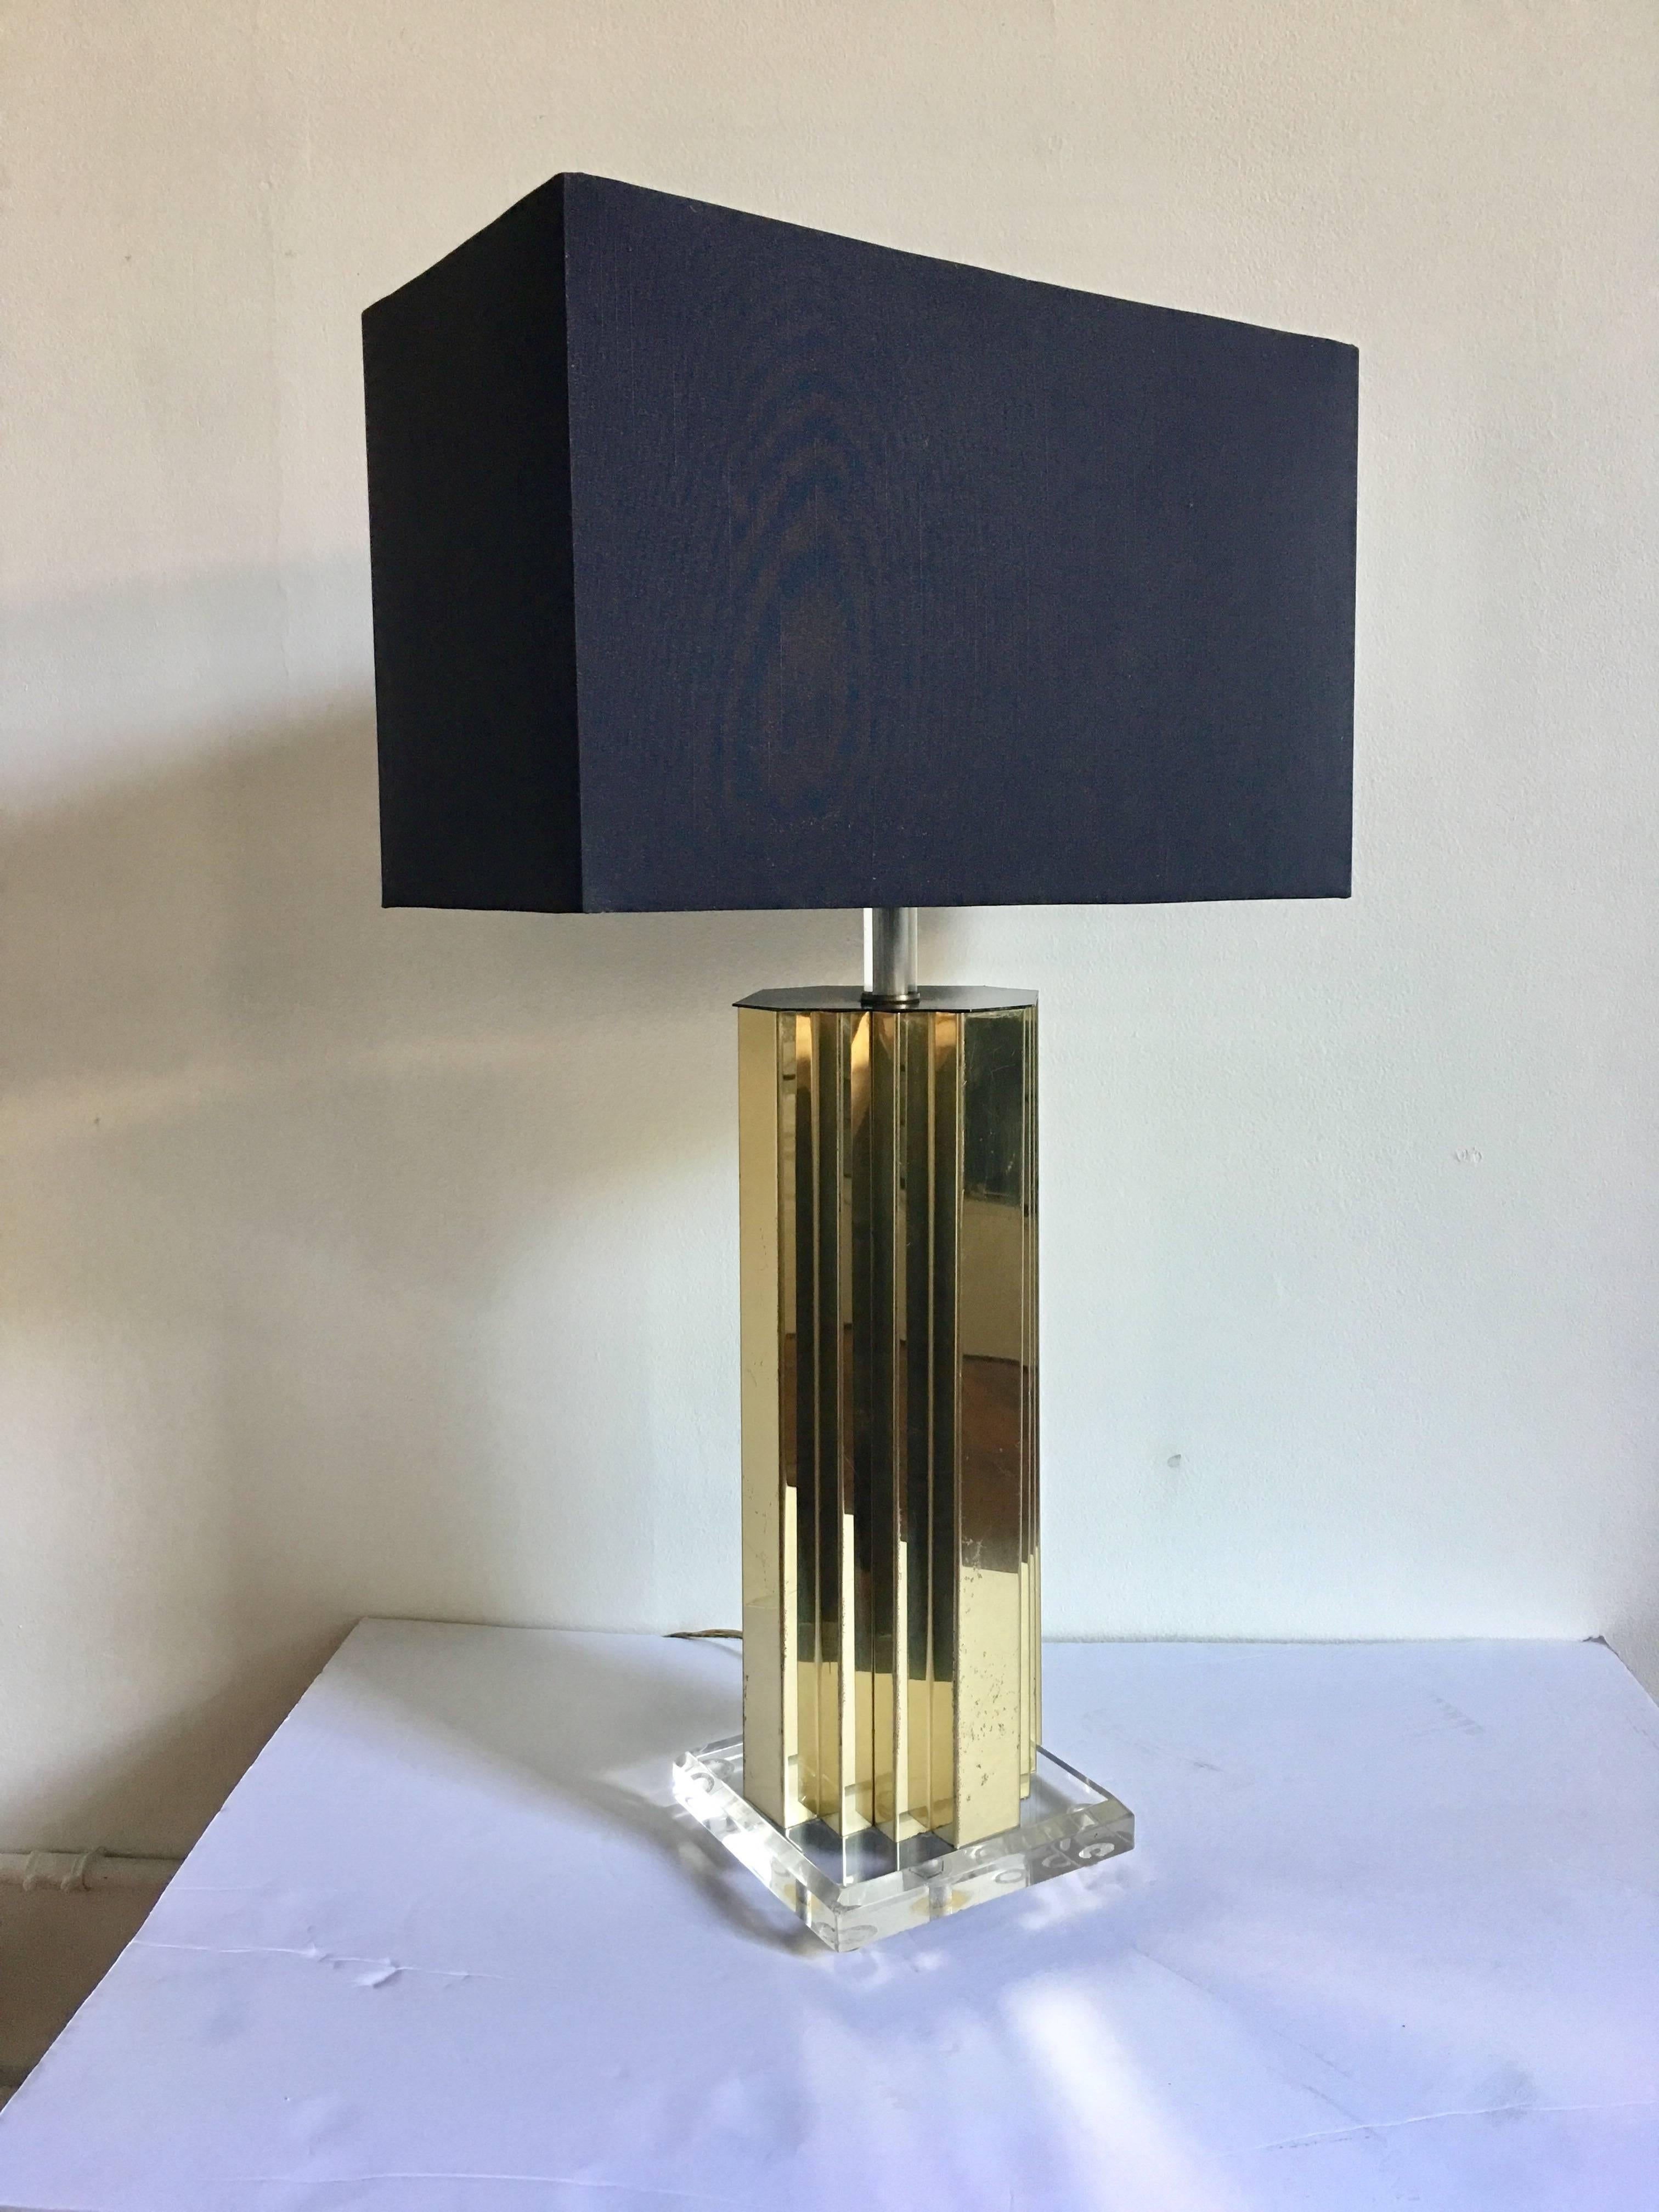 Glamorous Mid-Century Modern brass metal and Lucite table lamp. Base features a skyscraper form brass body mounted on a clear Lucite base.
In the style of Curtis Jere. Lampshade not included. 

Measures: Height to finial: 28.5 Inches.
Height to